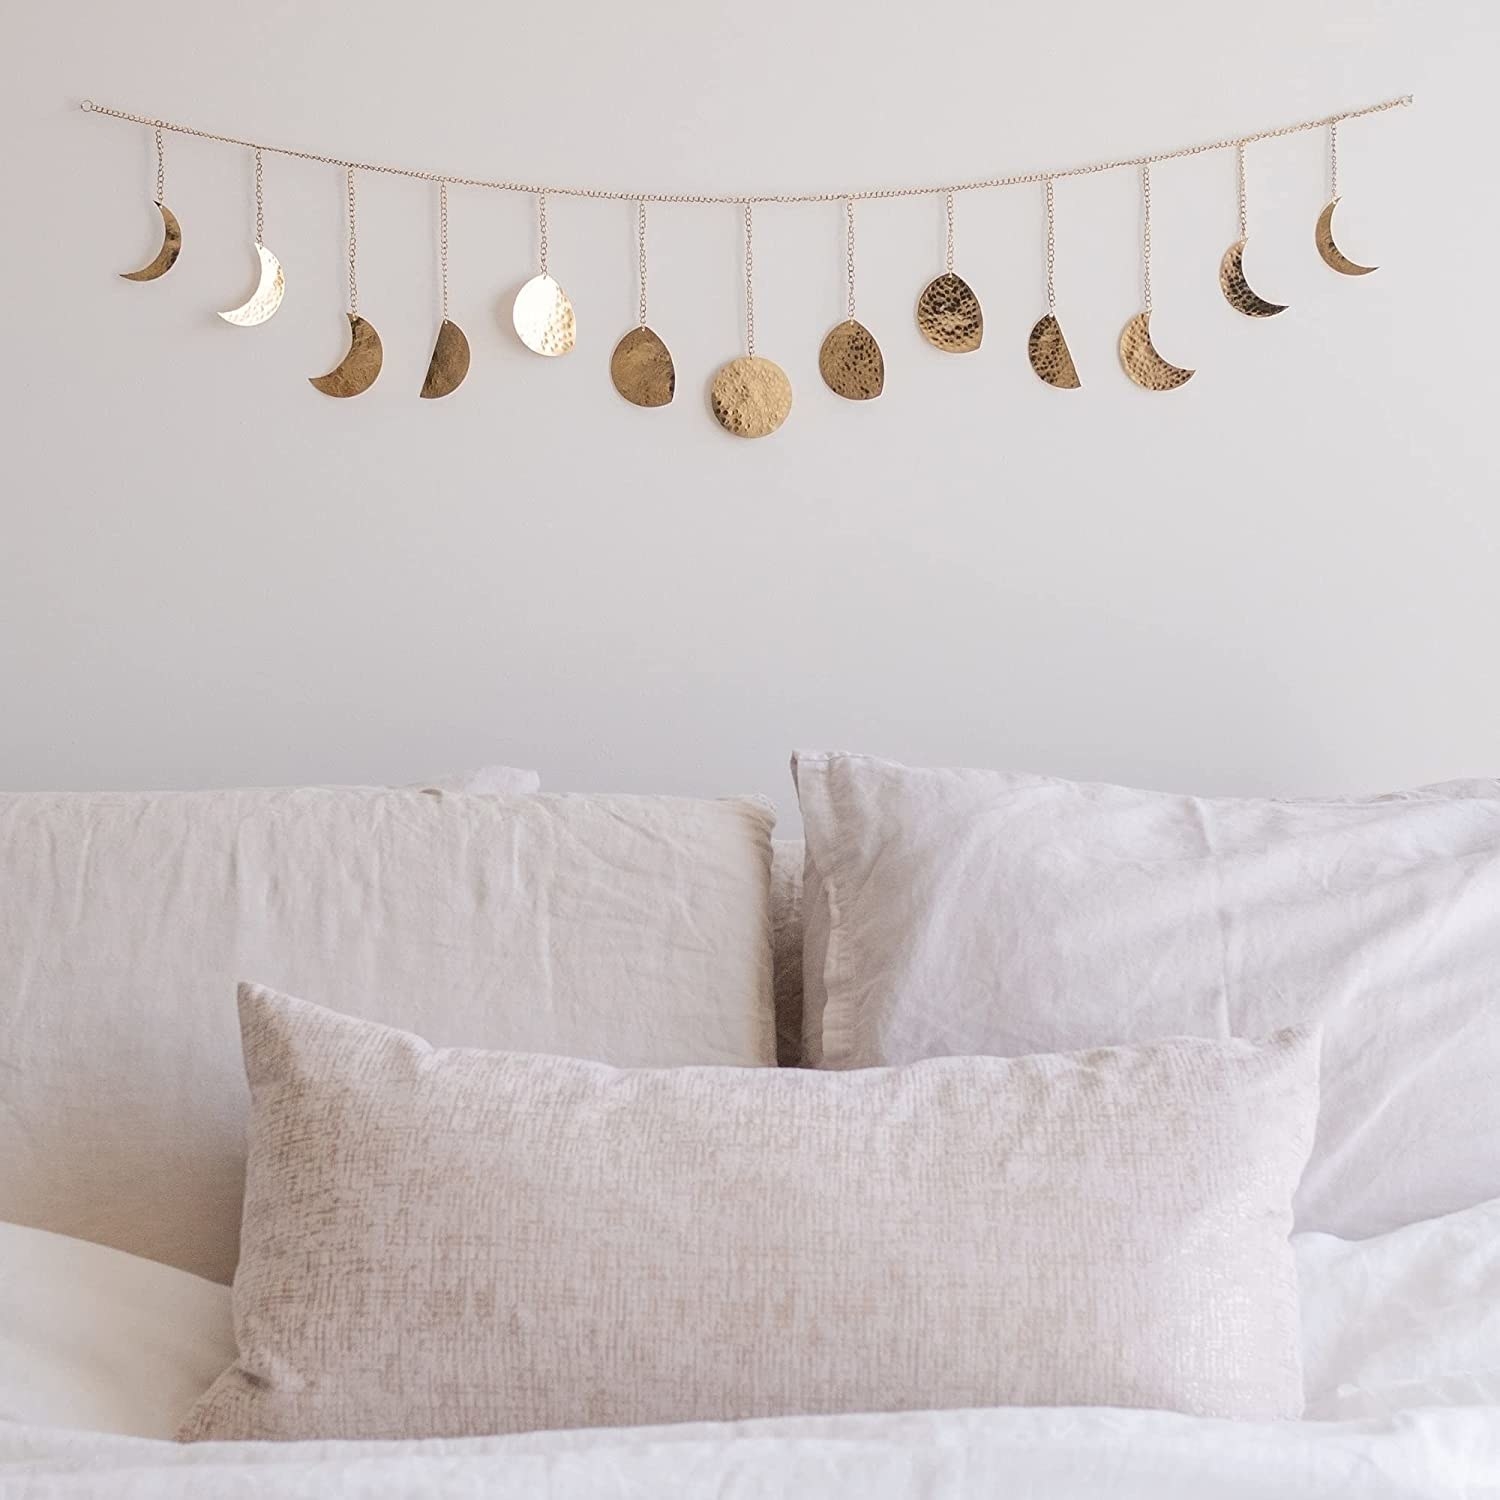 The gold hammered metal moon phase garland above a bed